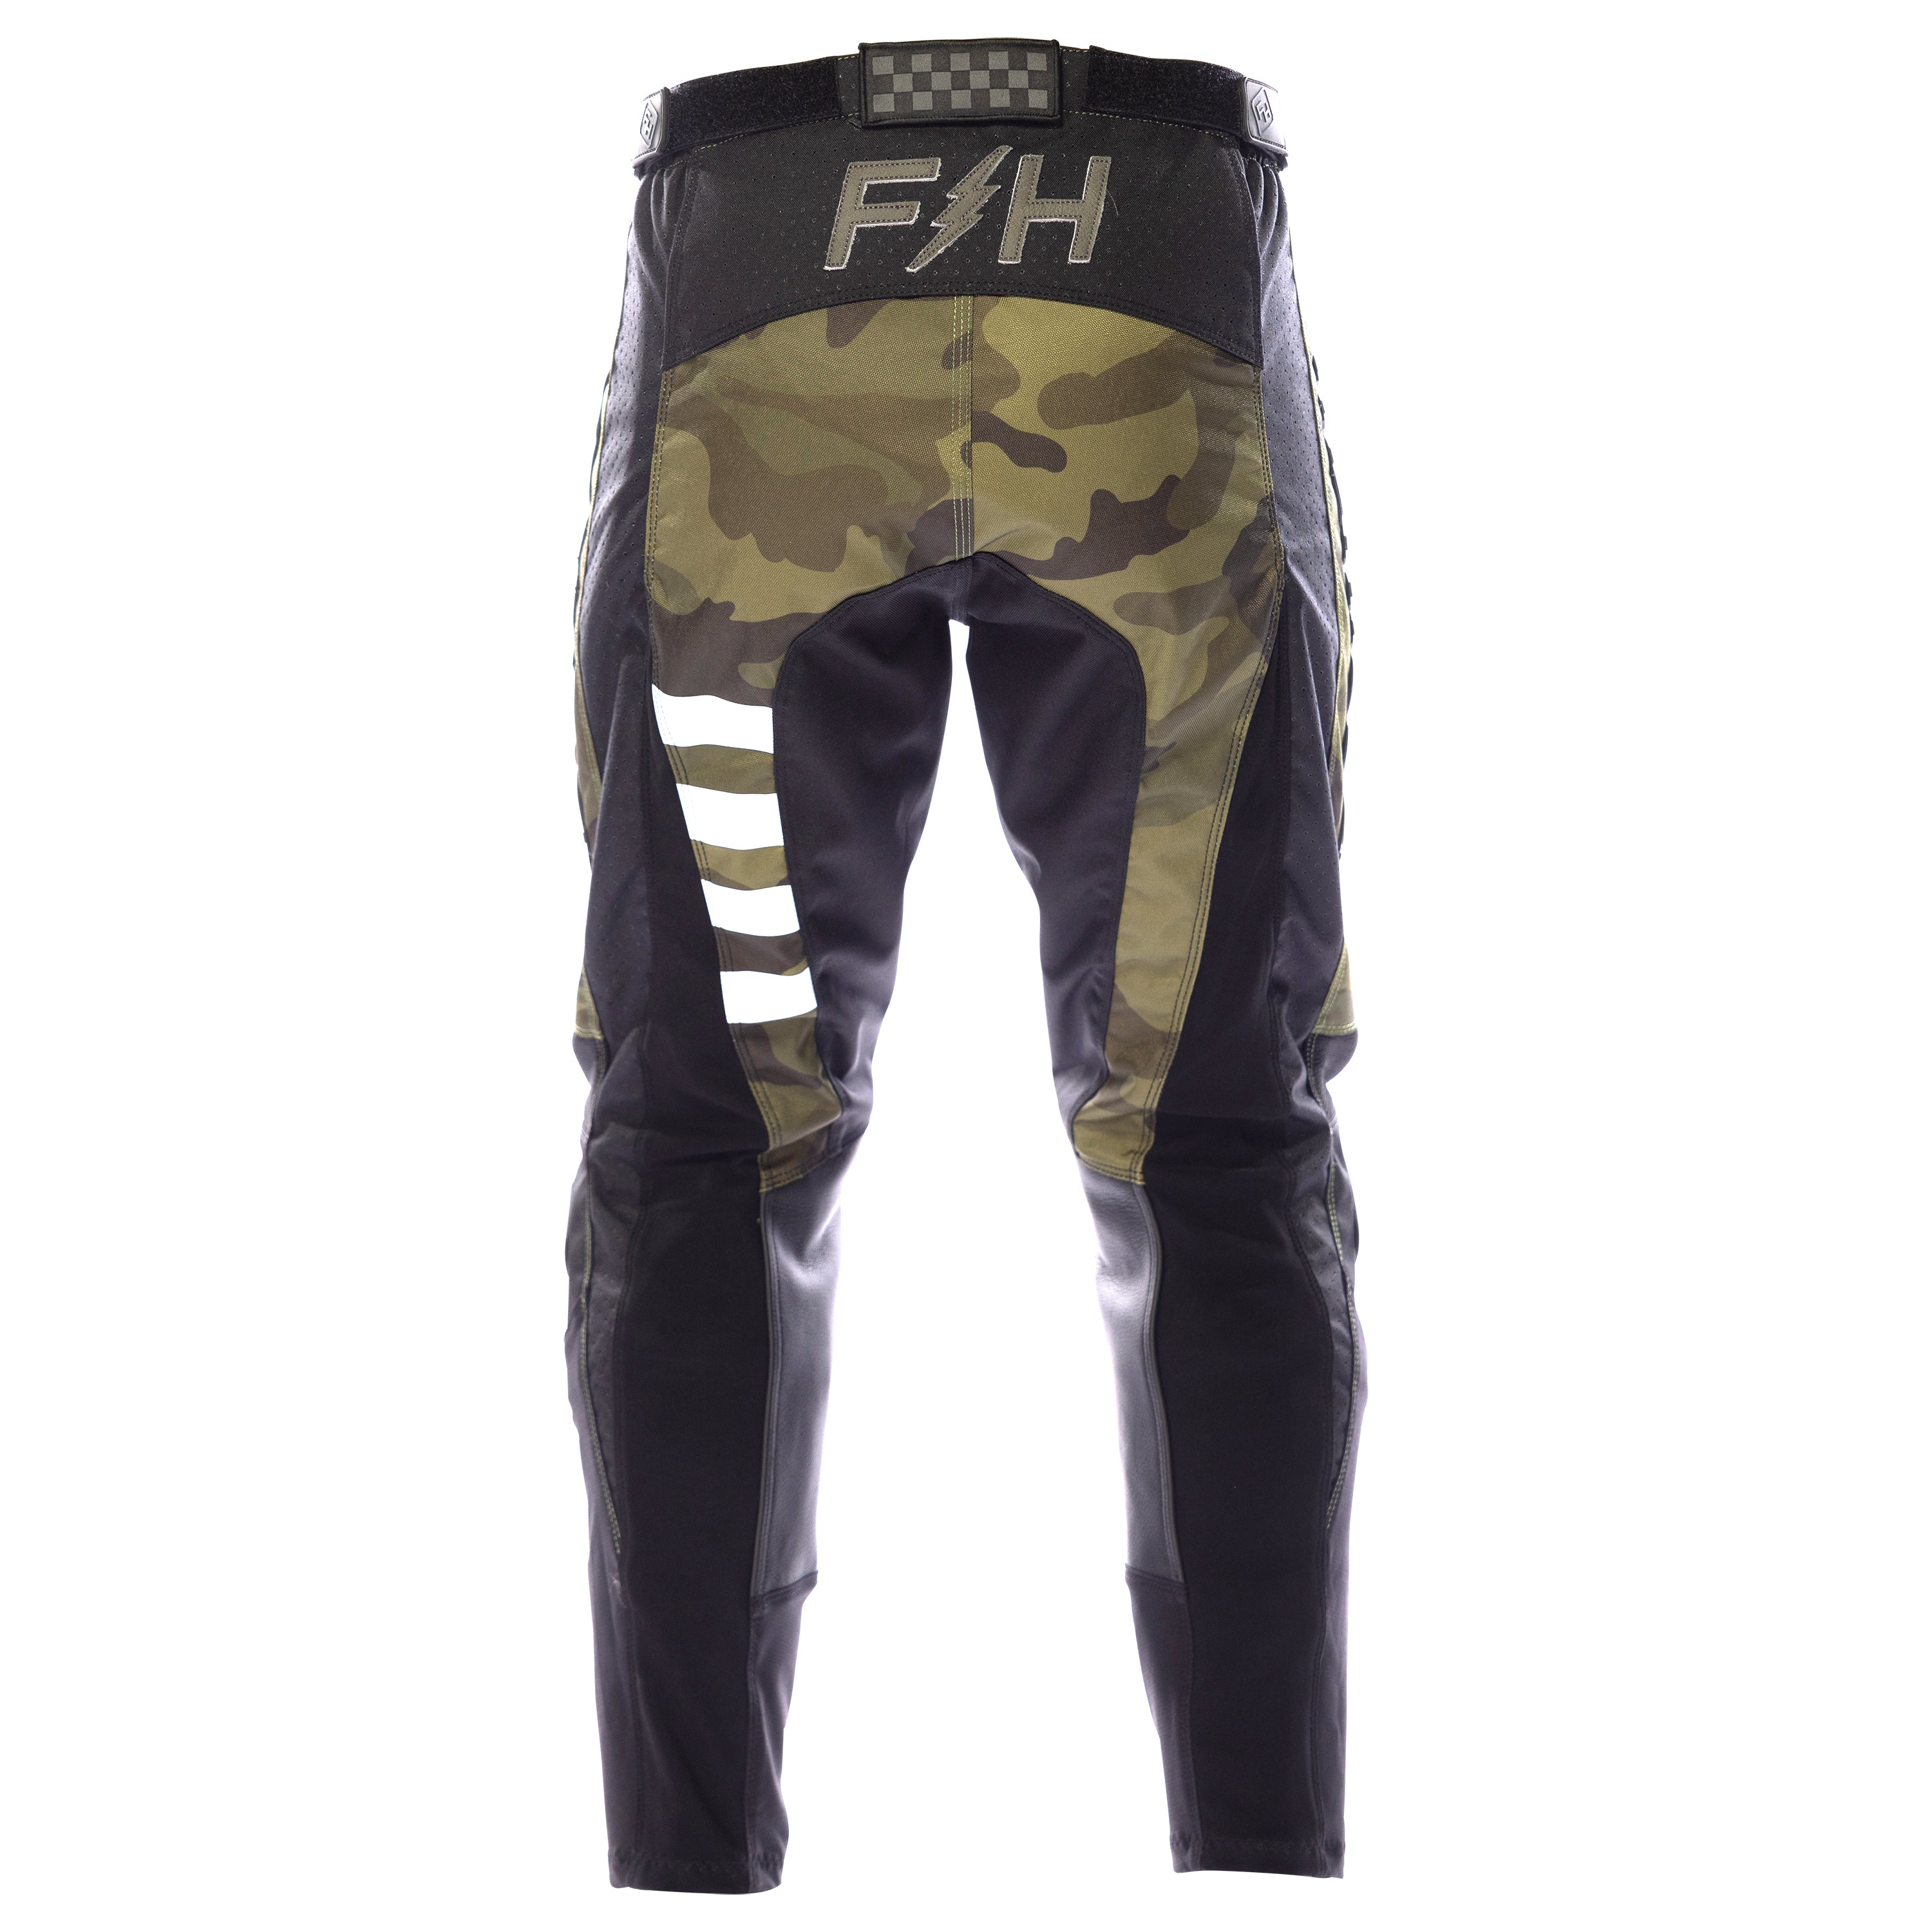 Youth Grindhouse Pant